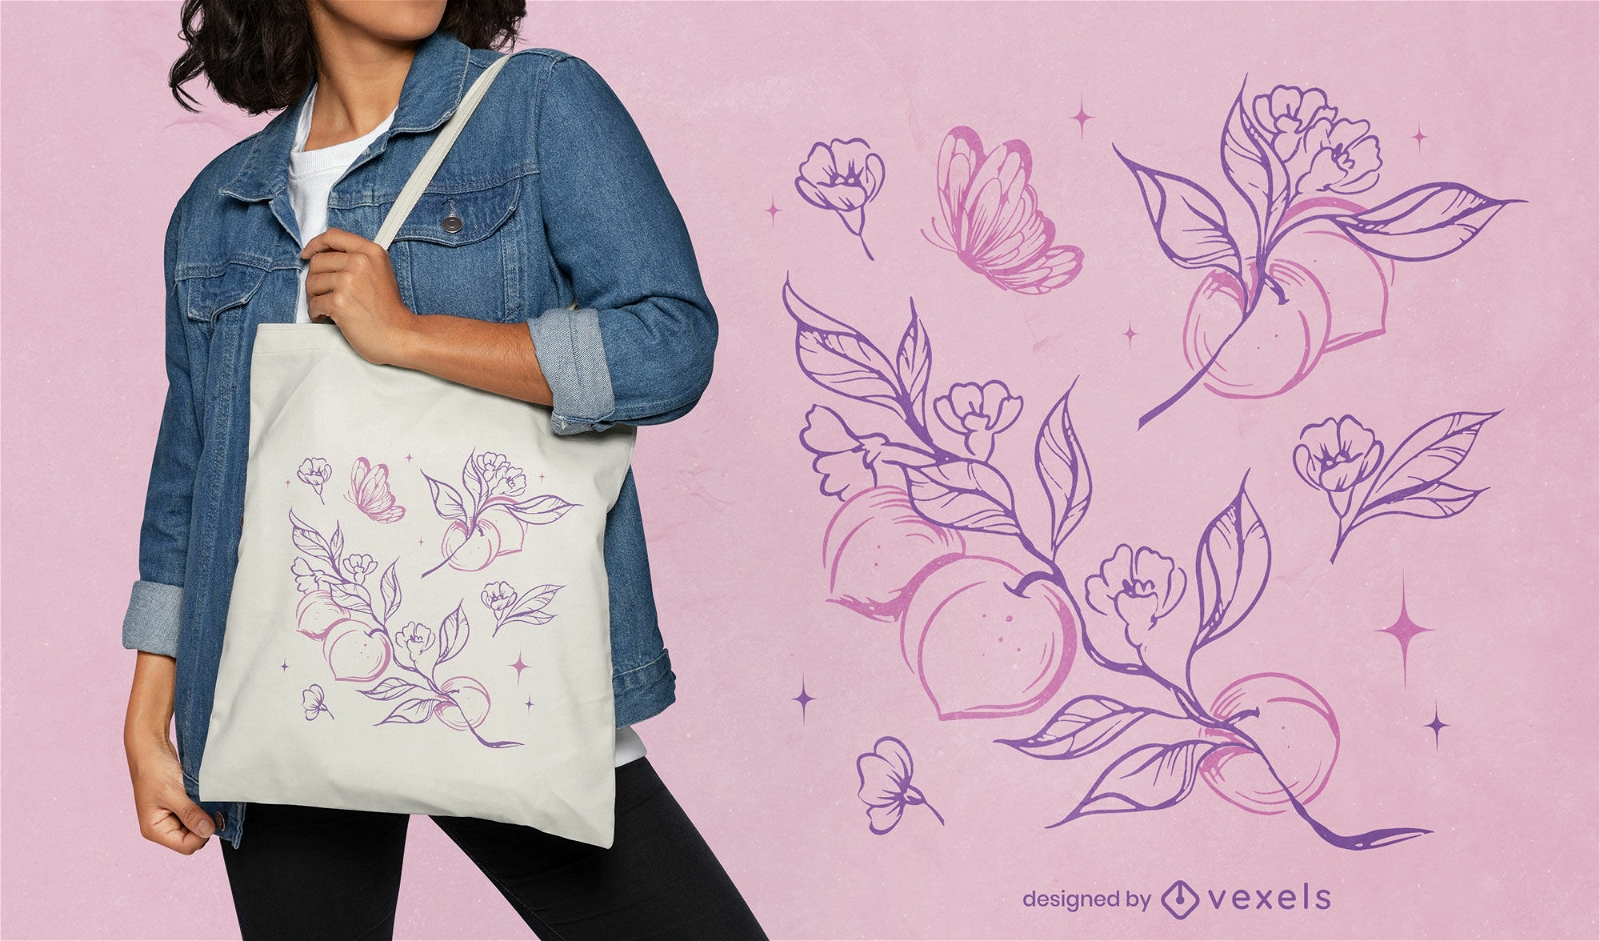 Peaches and flowers tote bag design